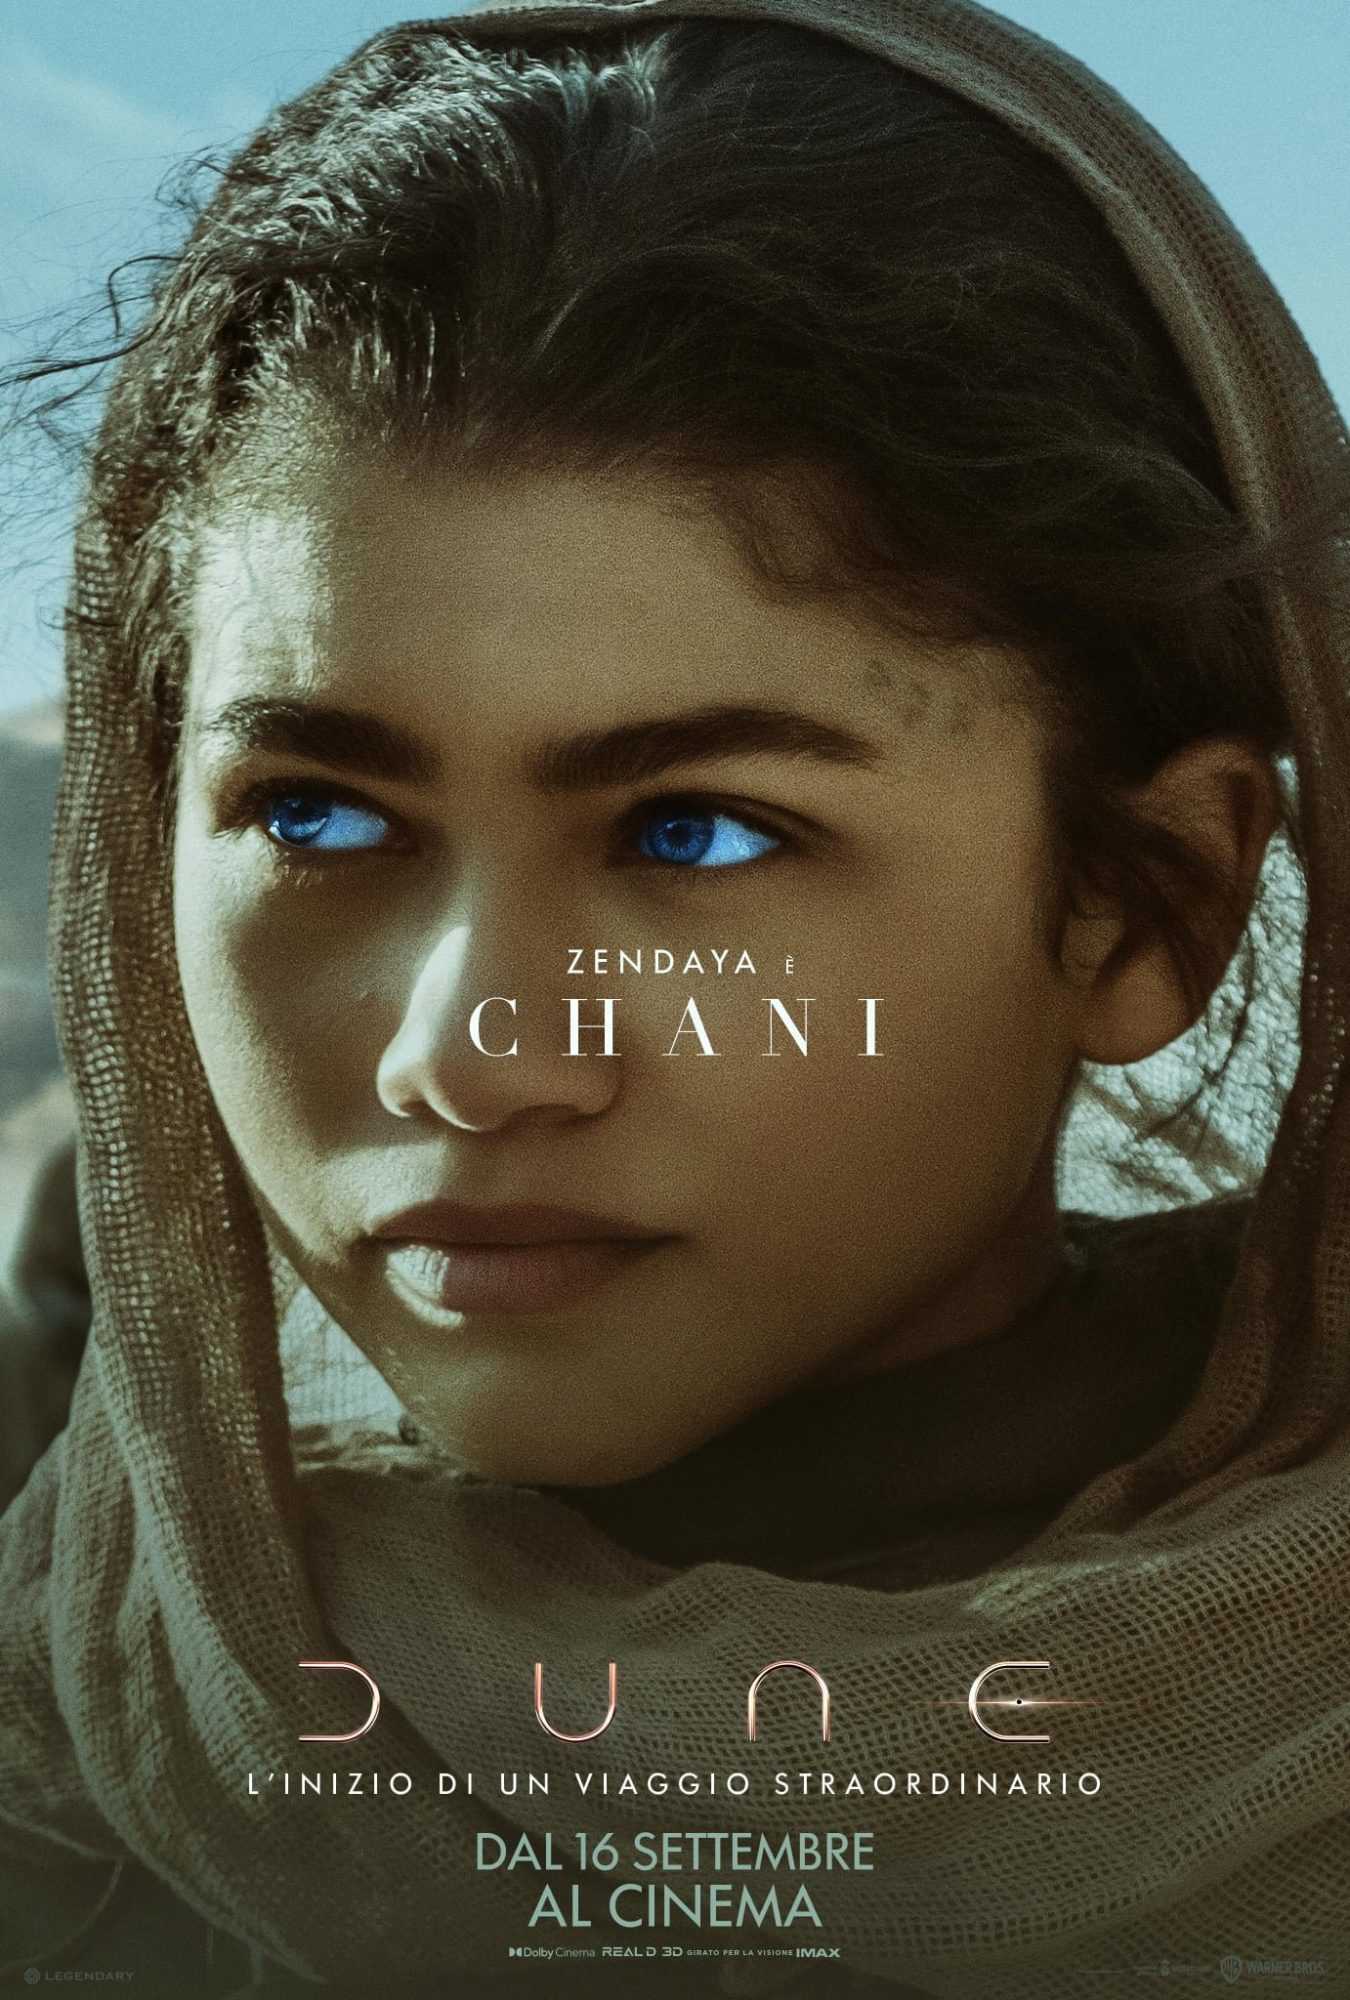 Dune: nuovo banner e character poster ufficiali